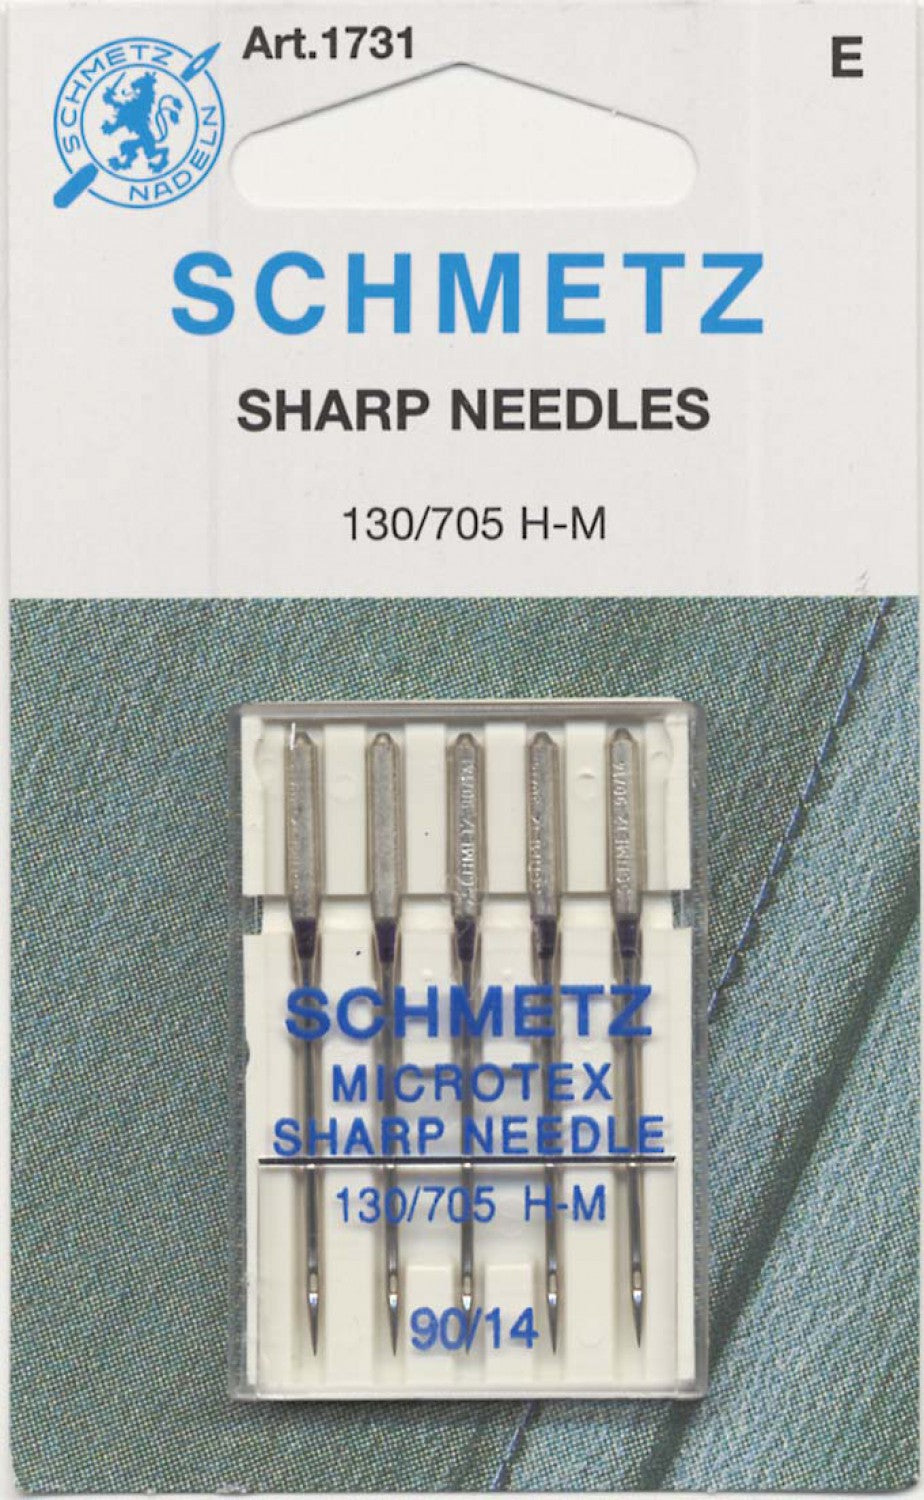 Schmetz MIcrotex Needle - 90/14 - 1 Package of 5 Needles